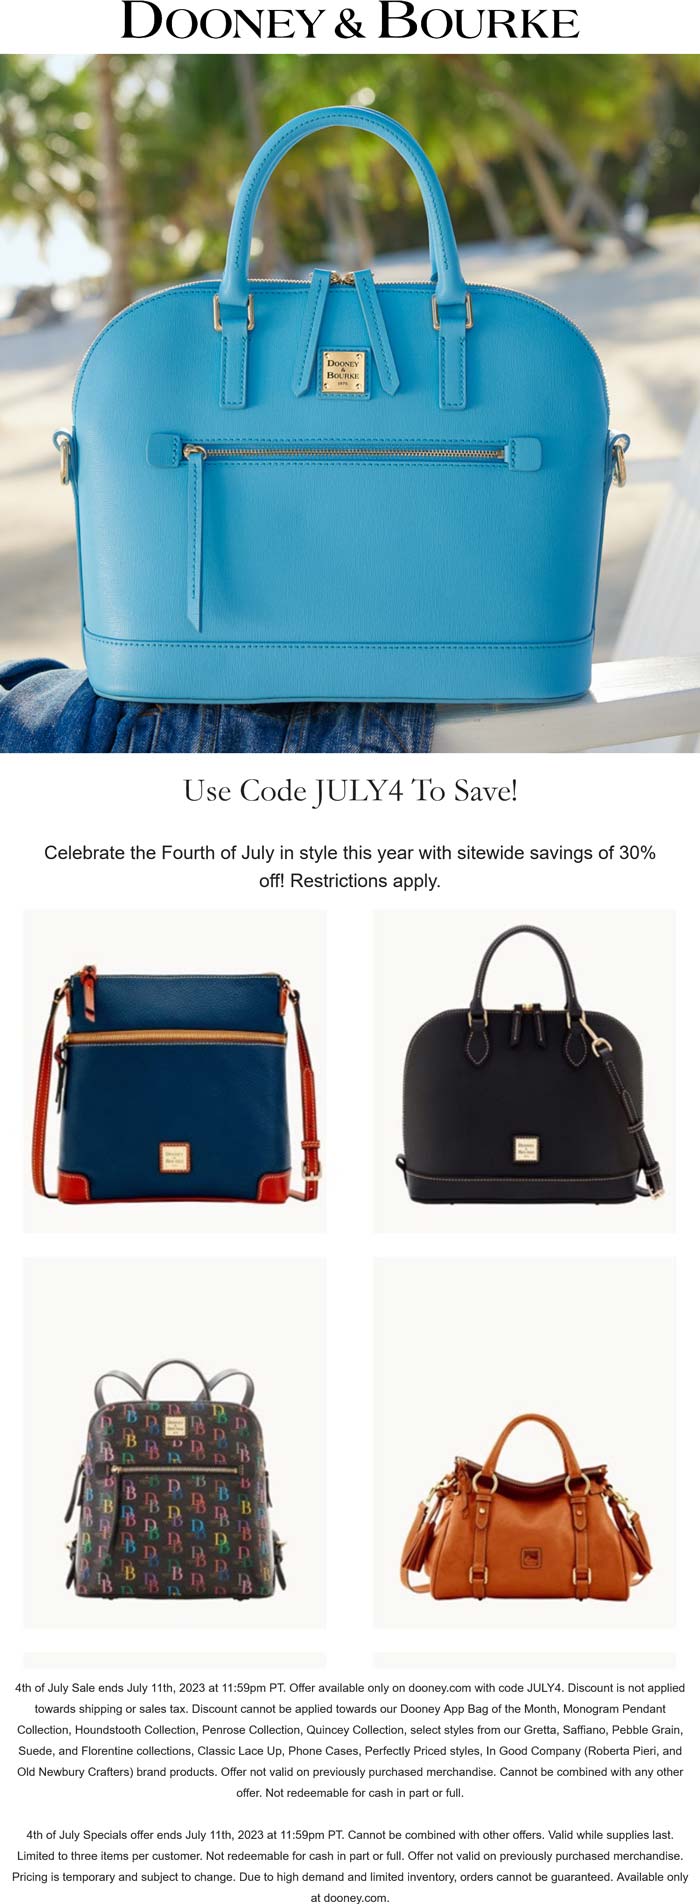 Dooney & Bourke stores Coupon  30% off everything at Dooney & Bourke via promo code JULY4 #dooneybourke 